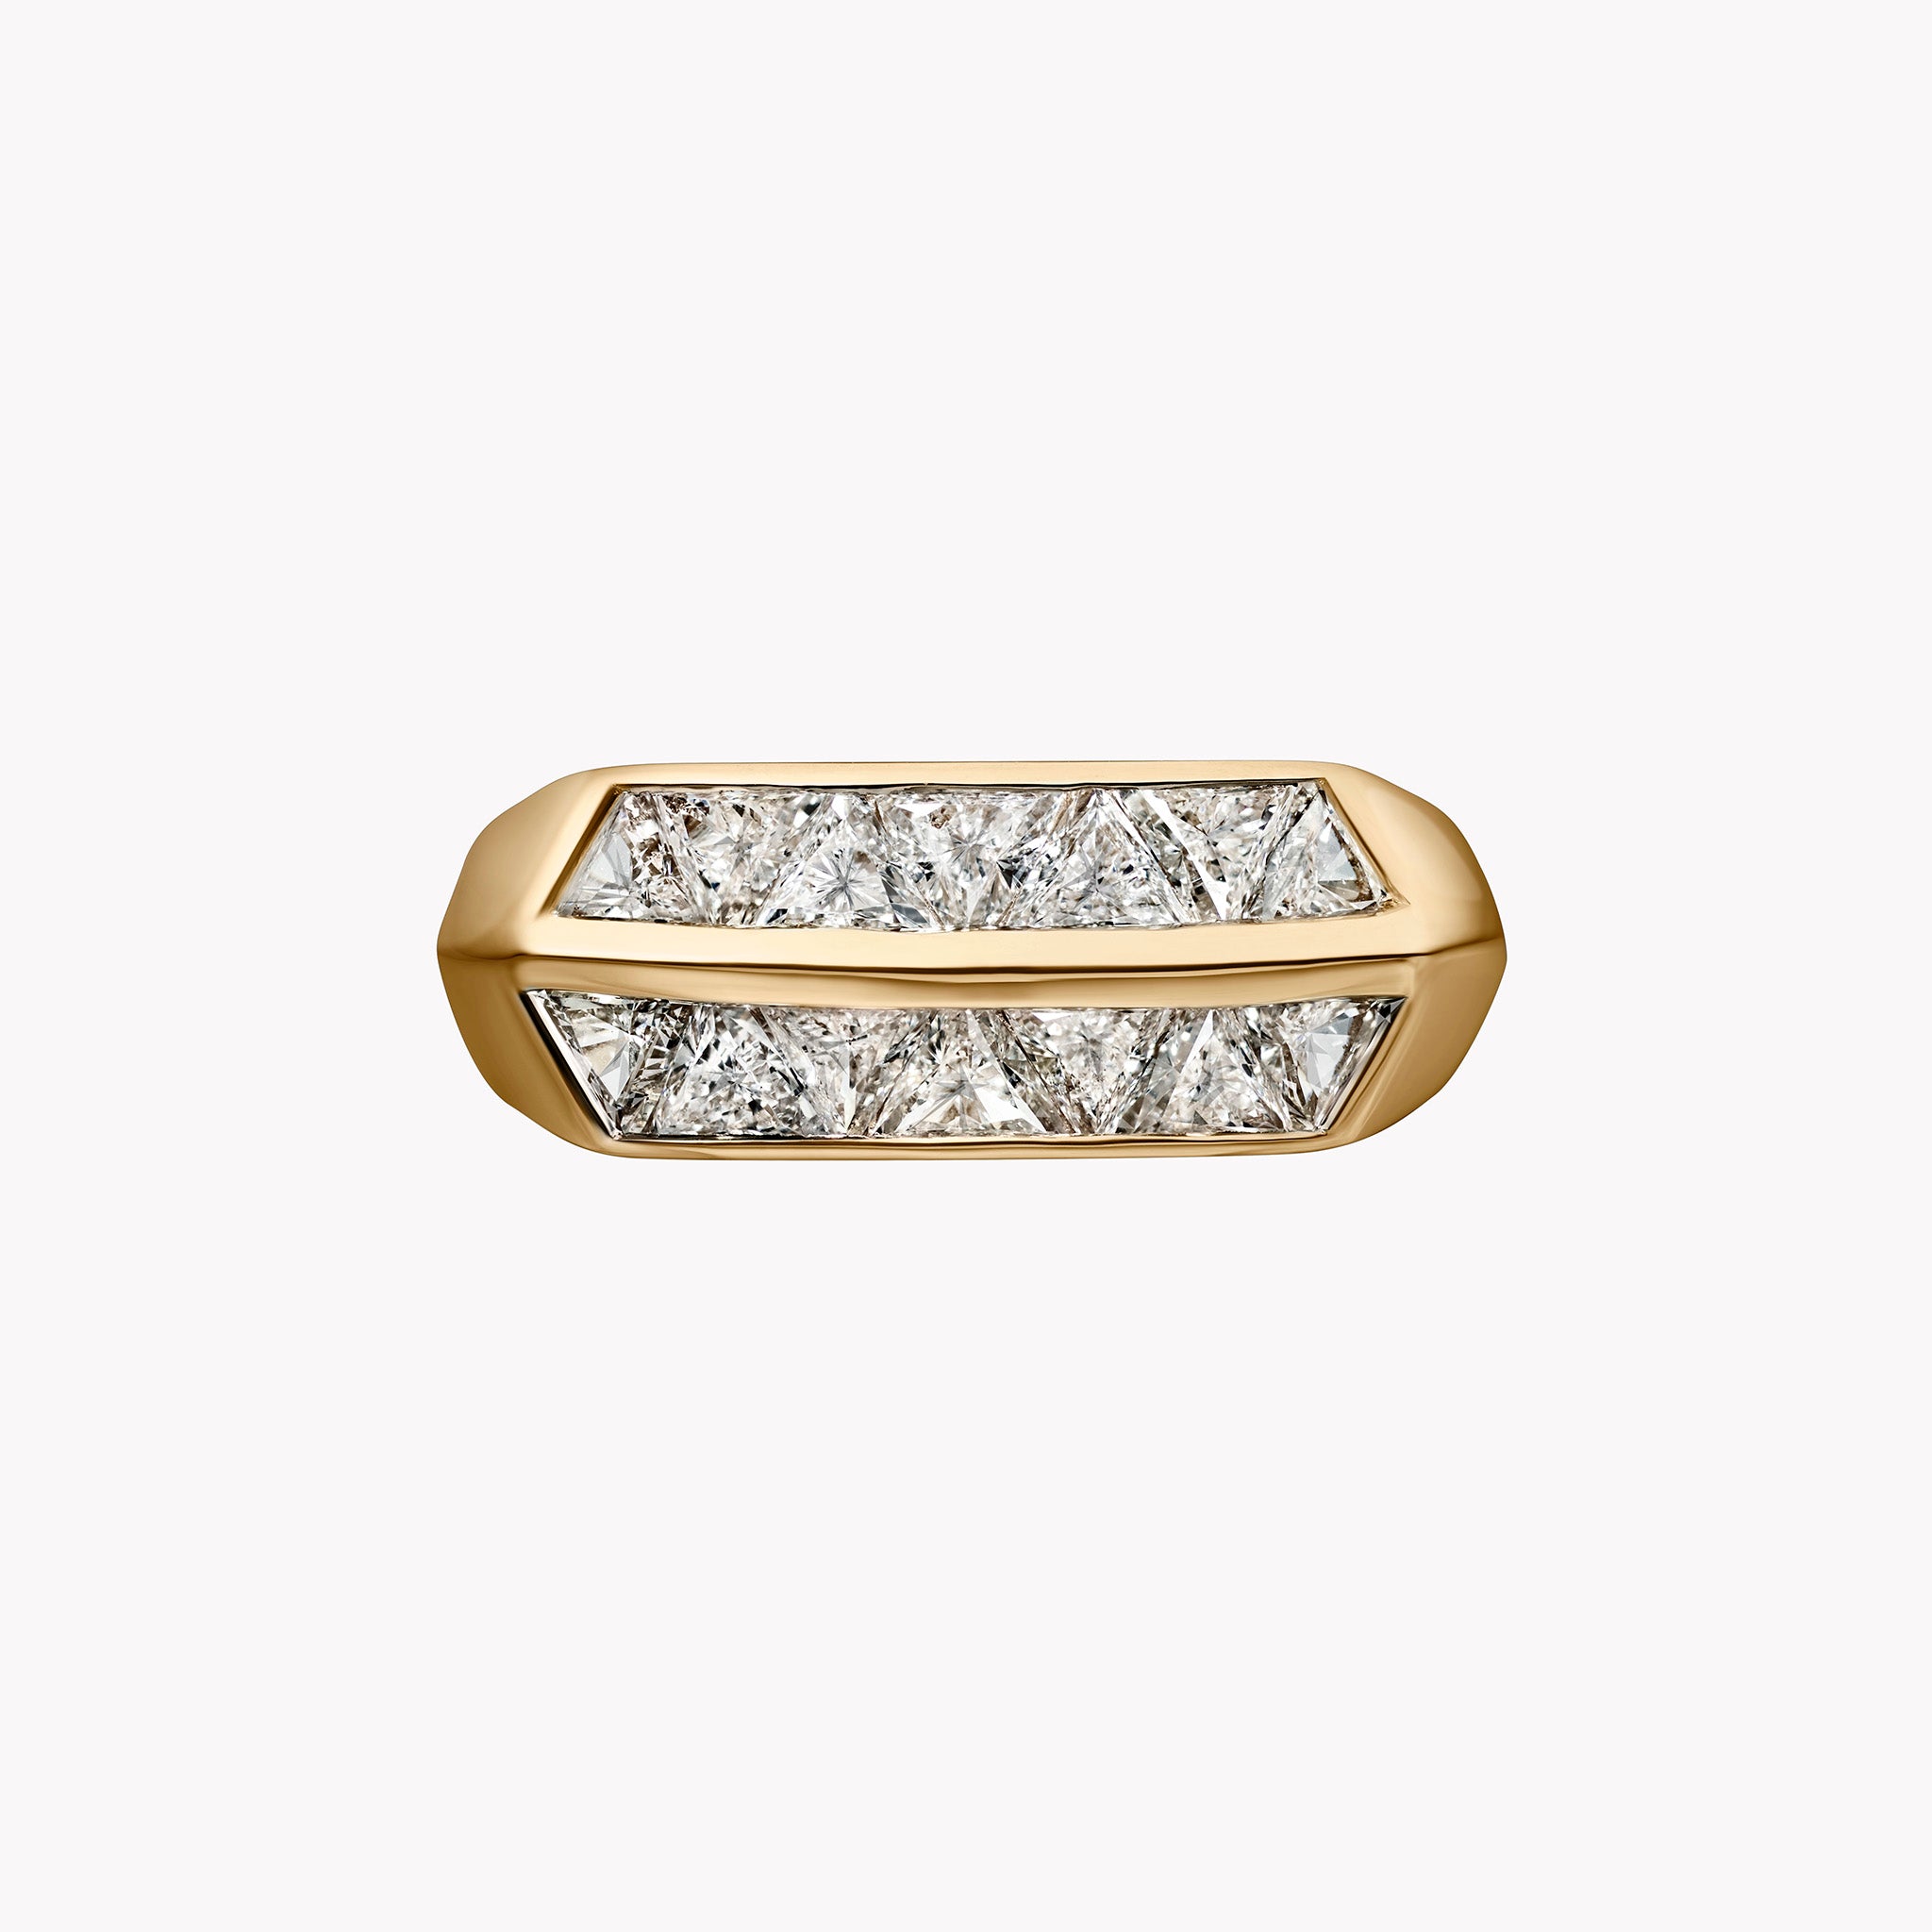 The Odile Ring